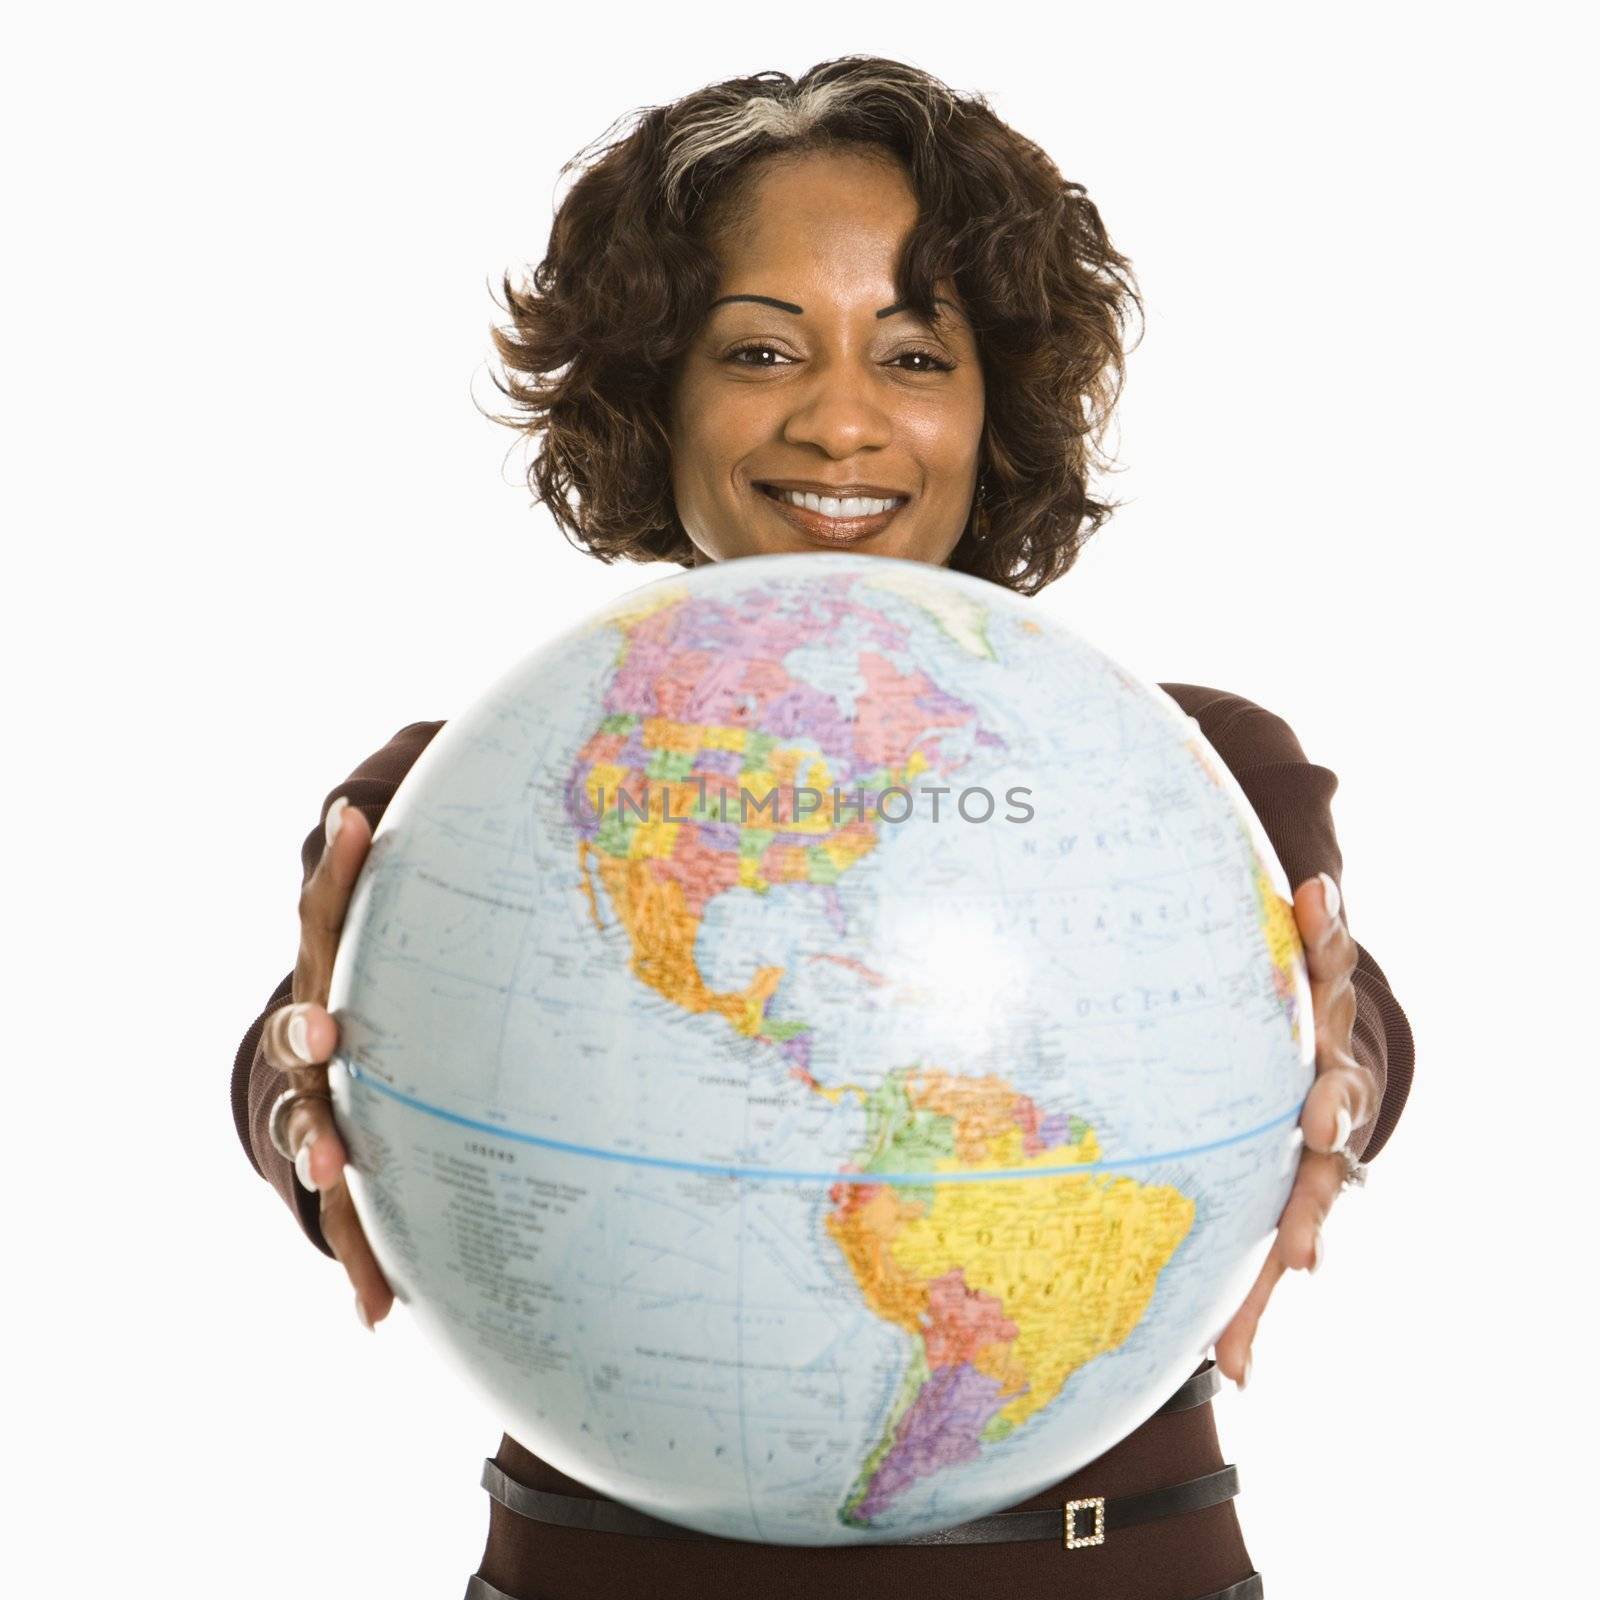 Smiling woman holding out world globe.